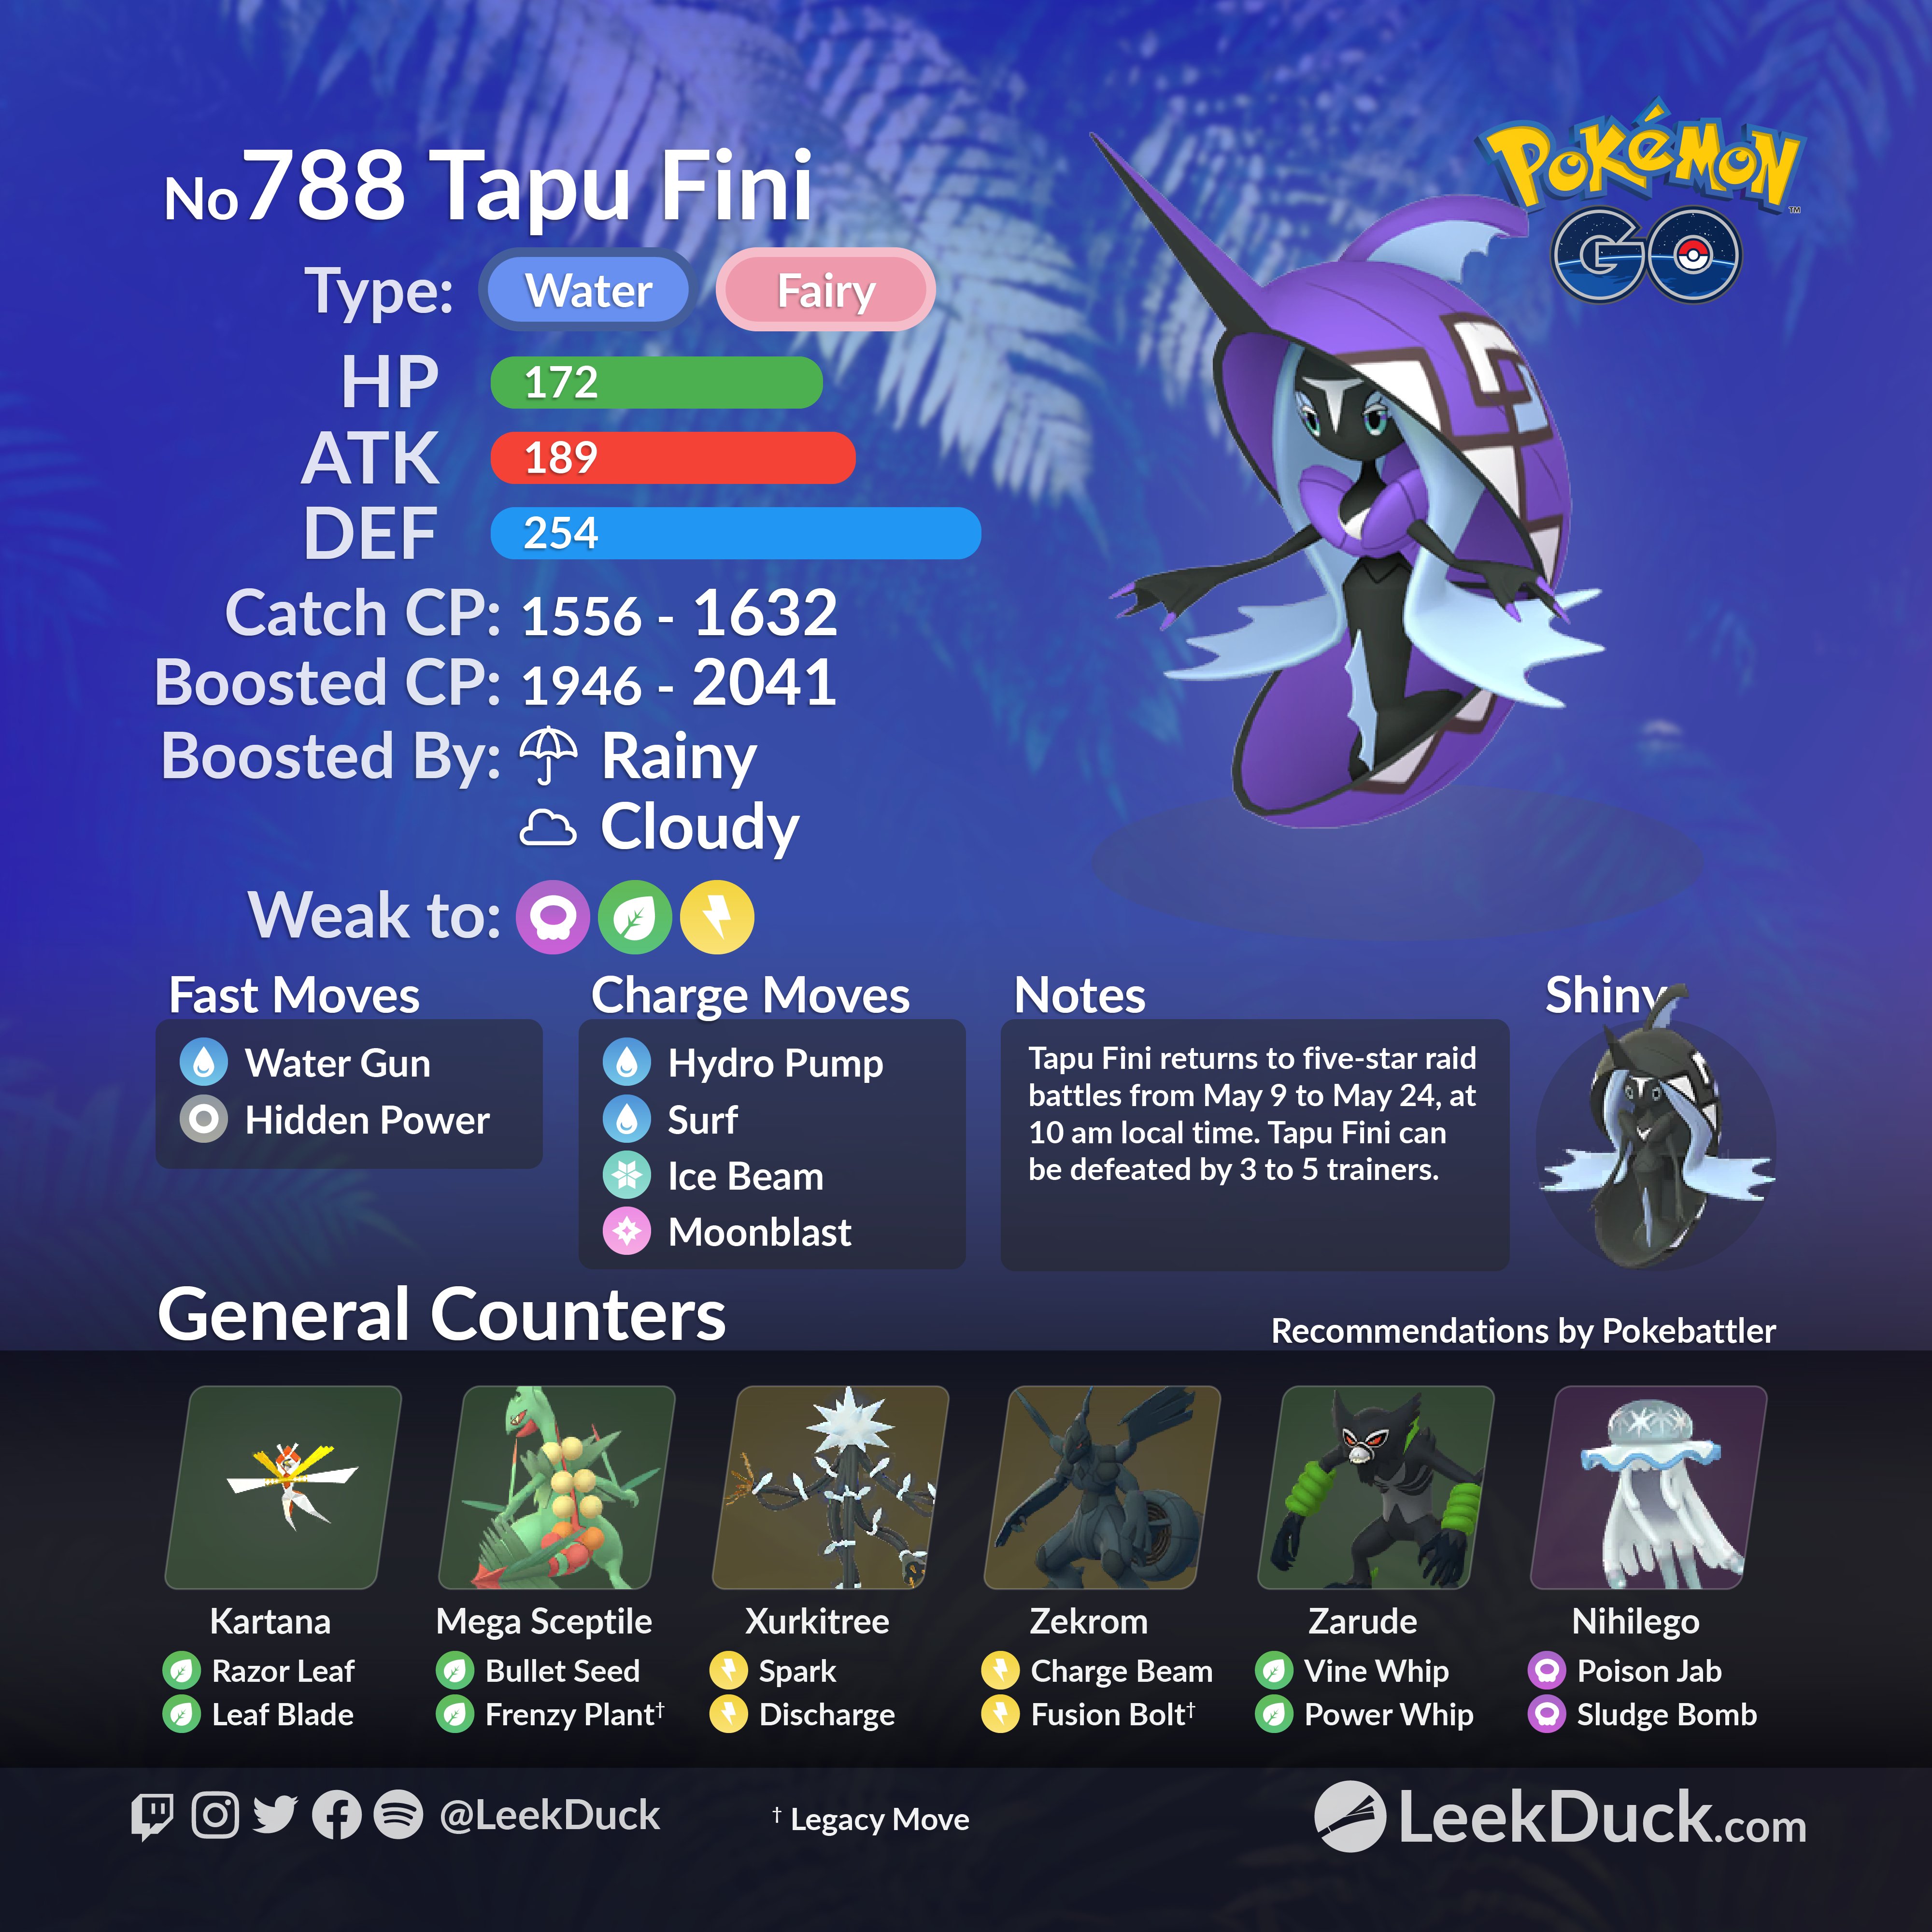 Genesect with a Shock Drive in 5-star Raid Battles - Leek Duck